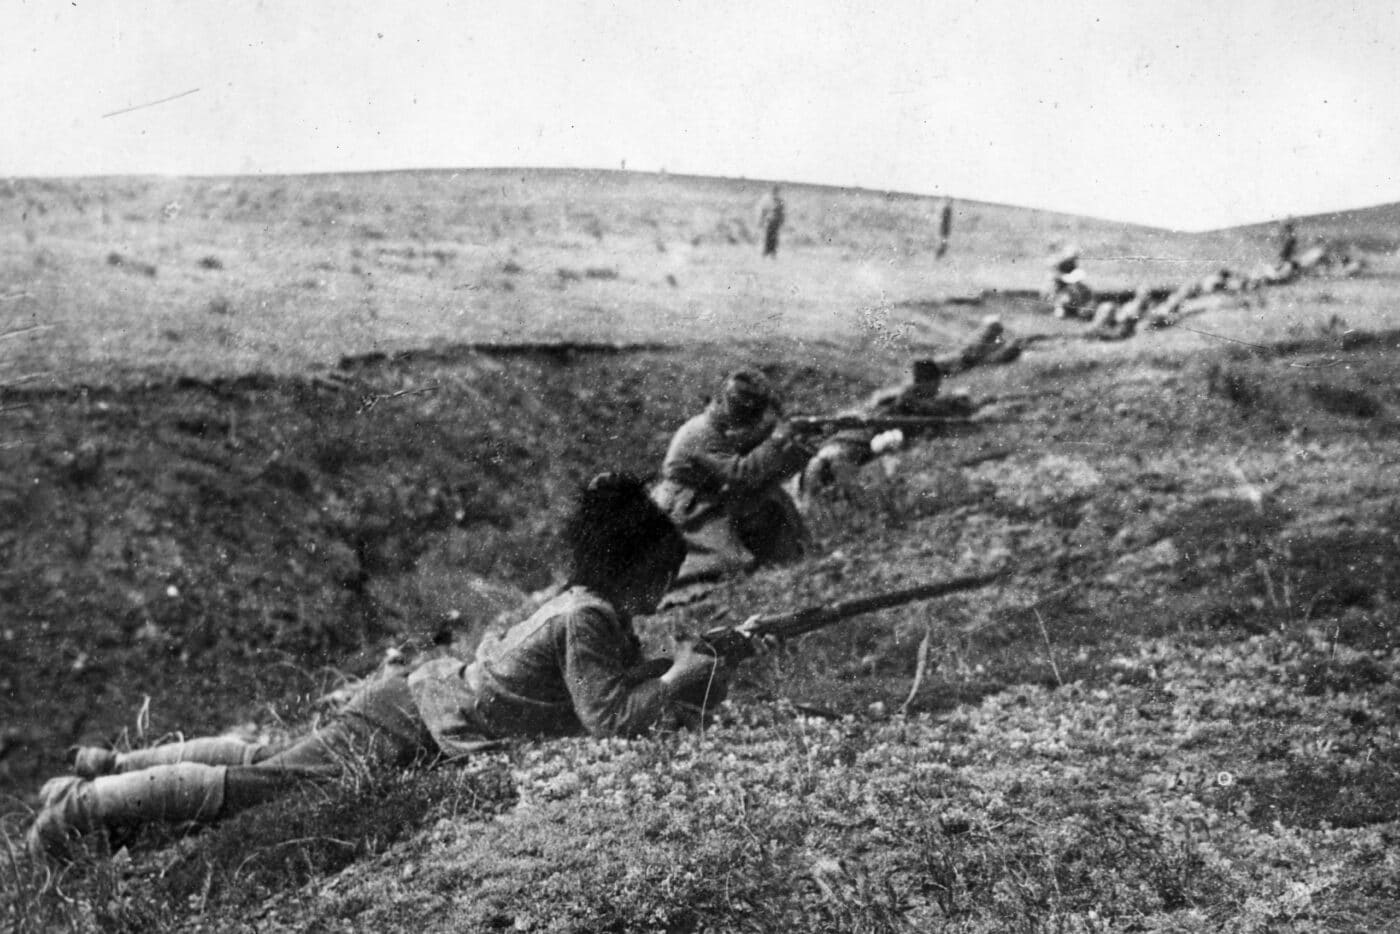 Cossacks fighting in WWI with rifles